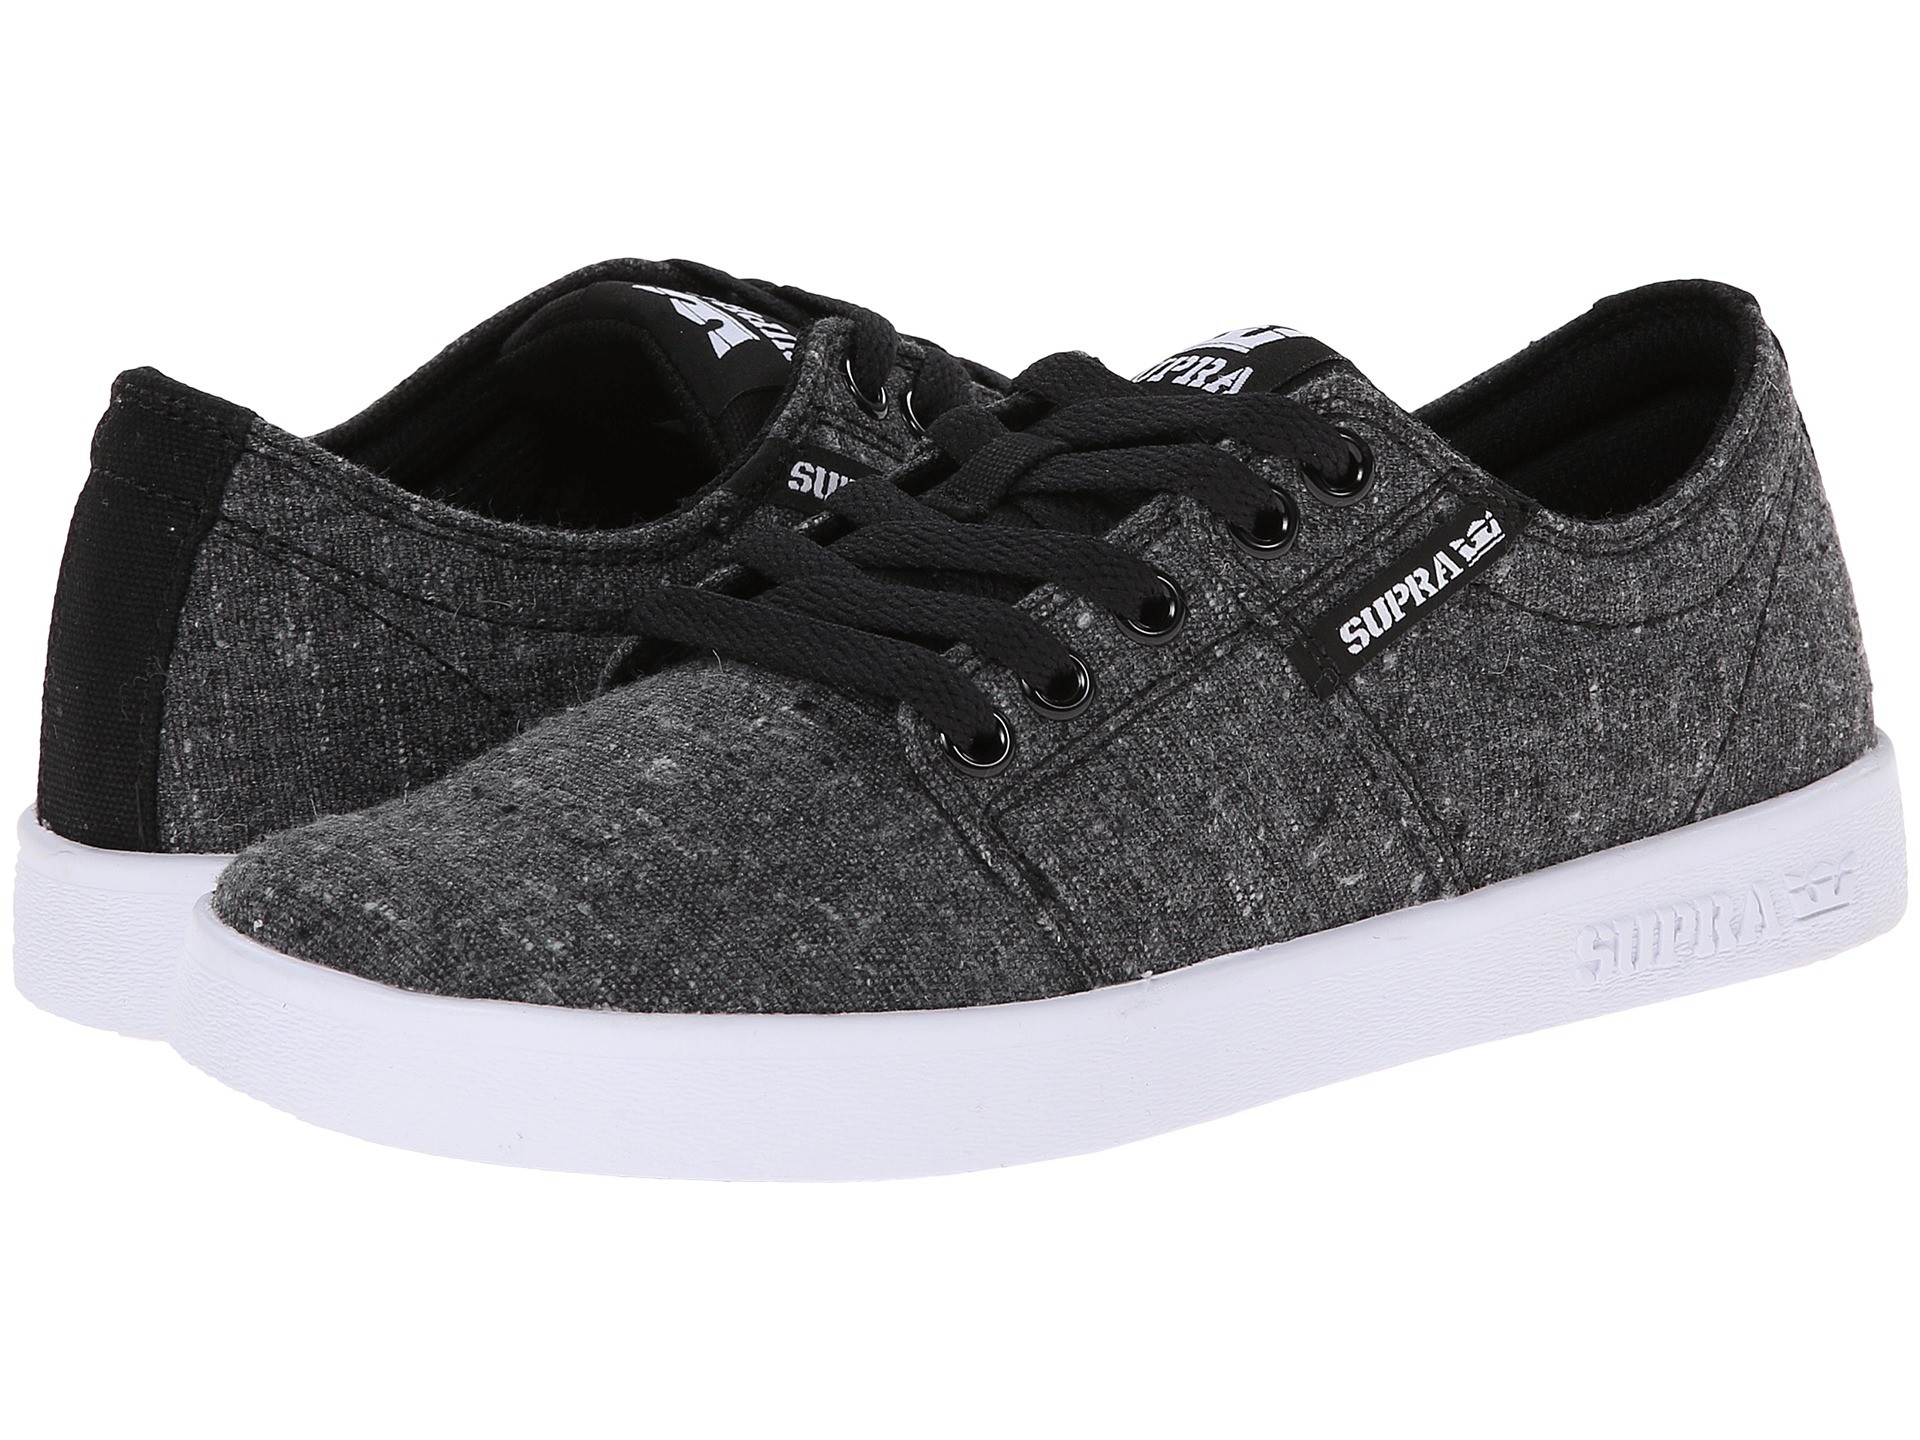 1920x1440 Charcoal Speckle/Black/White Supra Stacks II Shoes For sale,kids supra shoes